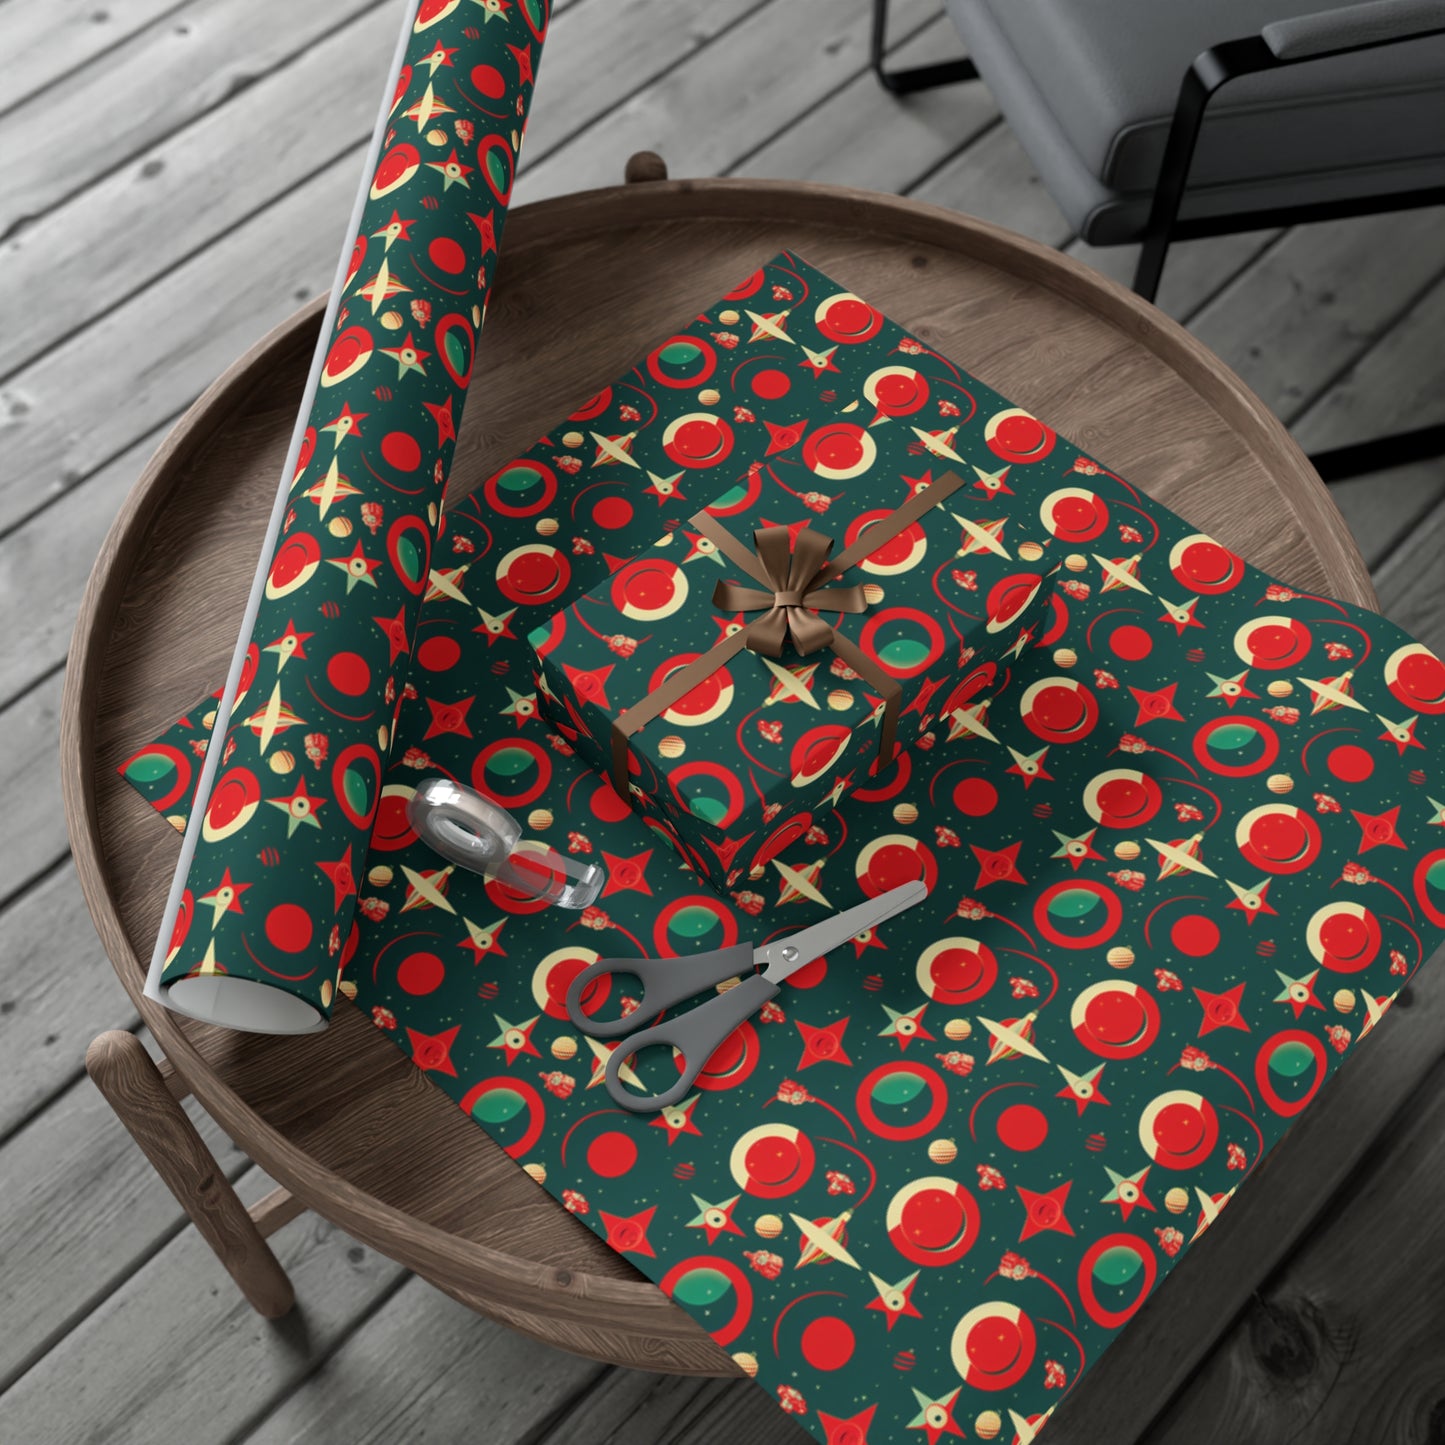 Black Ocean Red and Green Space gift wrap roll